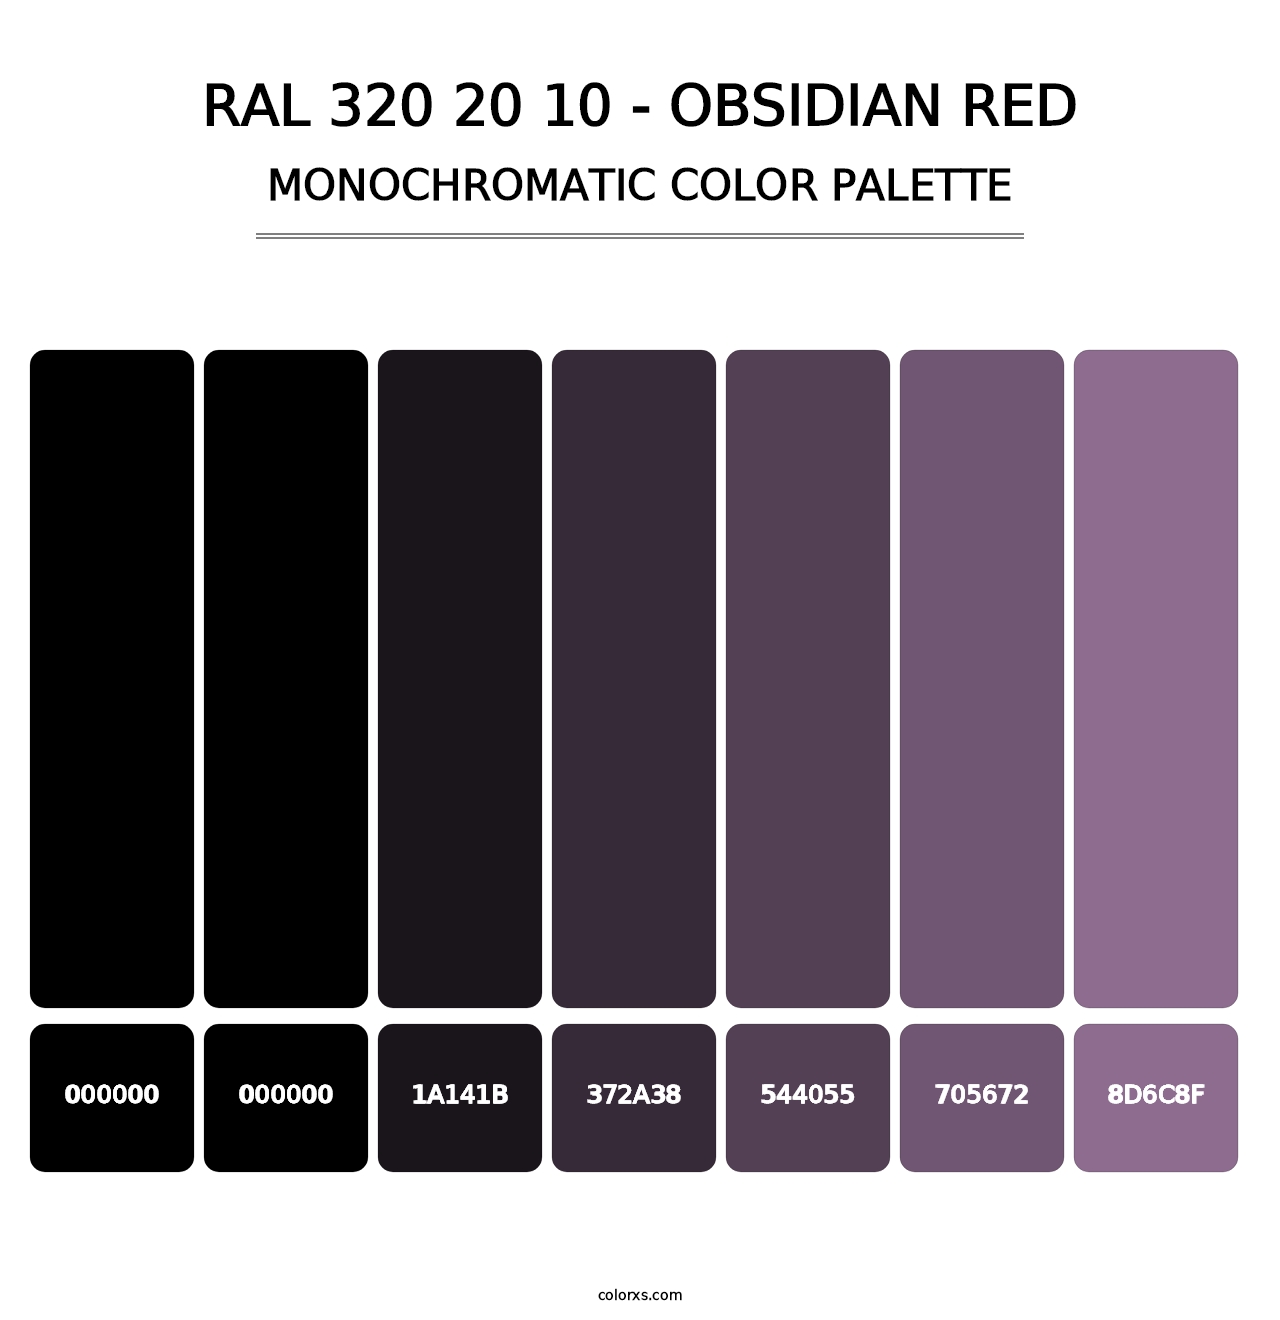 RAL 320 20 10 - Obsidian Red - Monochromatic Color Palette